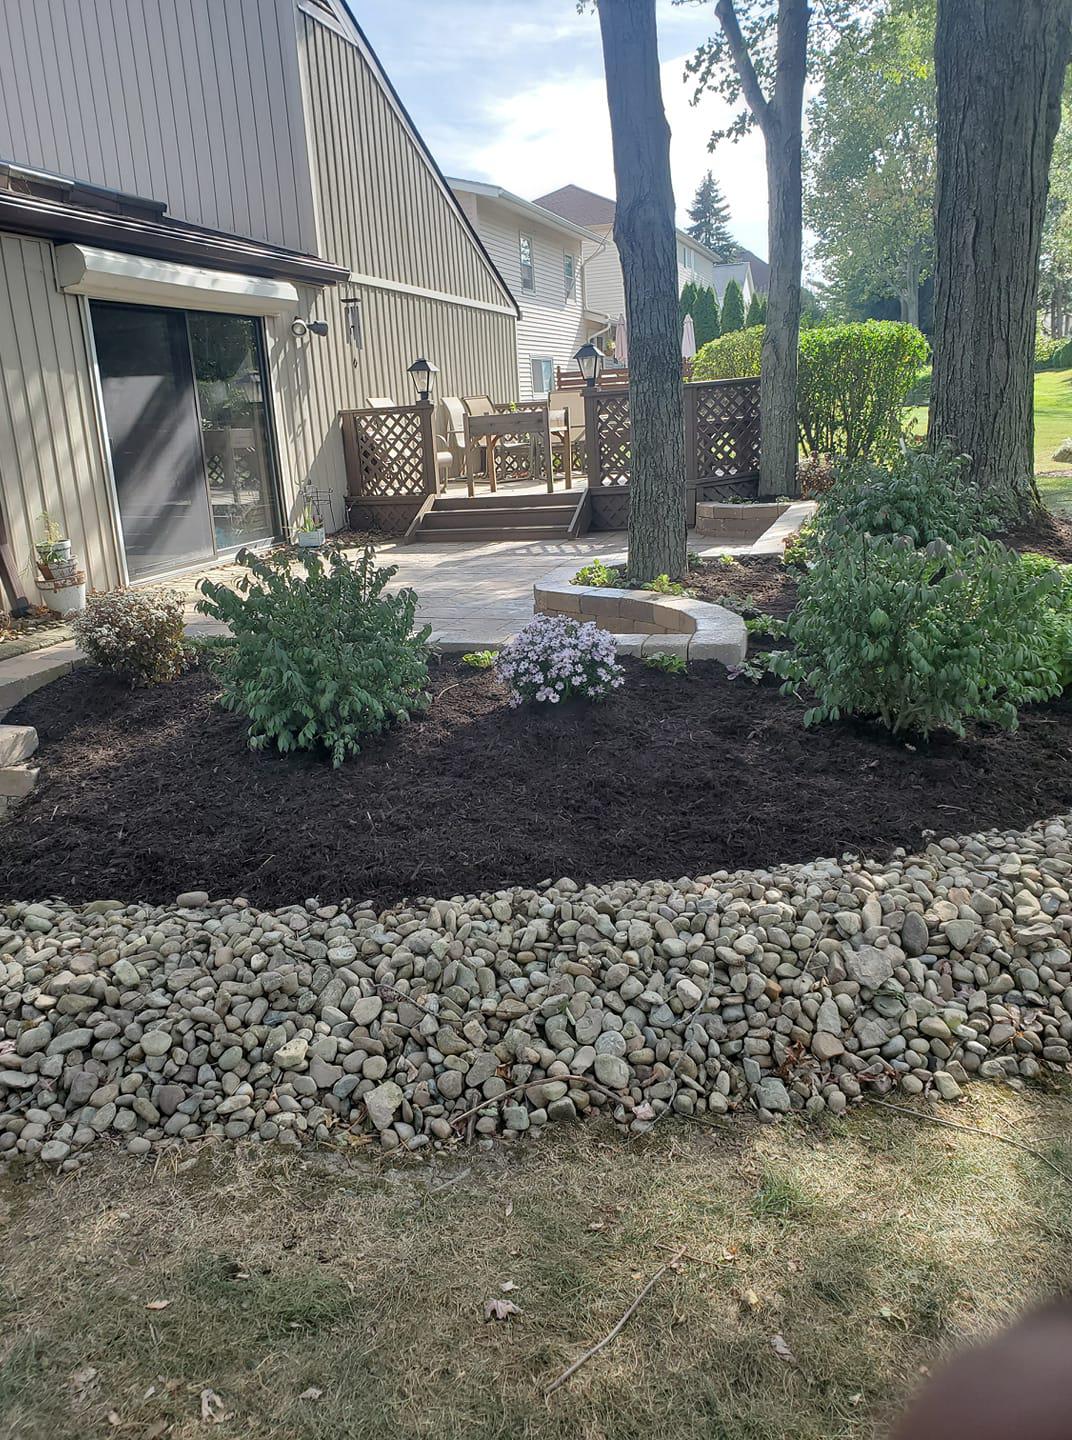 A one-stop source for all your landscaping needs, Sherman & Sons Lawn Care enhances your home or business, all while being a good steward of the land.
It’s our passion and way of life. Whether lawn installation for new homes or renovating an existing landscape, we create sustainable landscapes that will provide color and interest year-round.
Our degreed horticulturists work with clients to design stunning landscapes that will look good every season and for years to come. Combining a mix of old-school sketches and modern 3-D renderings, you will see all the possibilities.
If you are looking to extend your living space outdoors, we install hardscapes, from paver patios and wood decks, to outdoor fireplaces and water fountains.